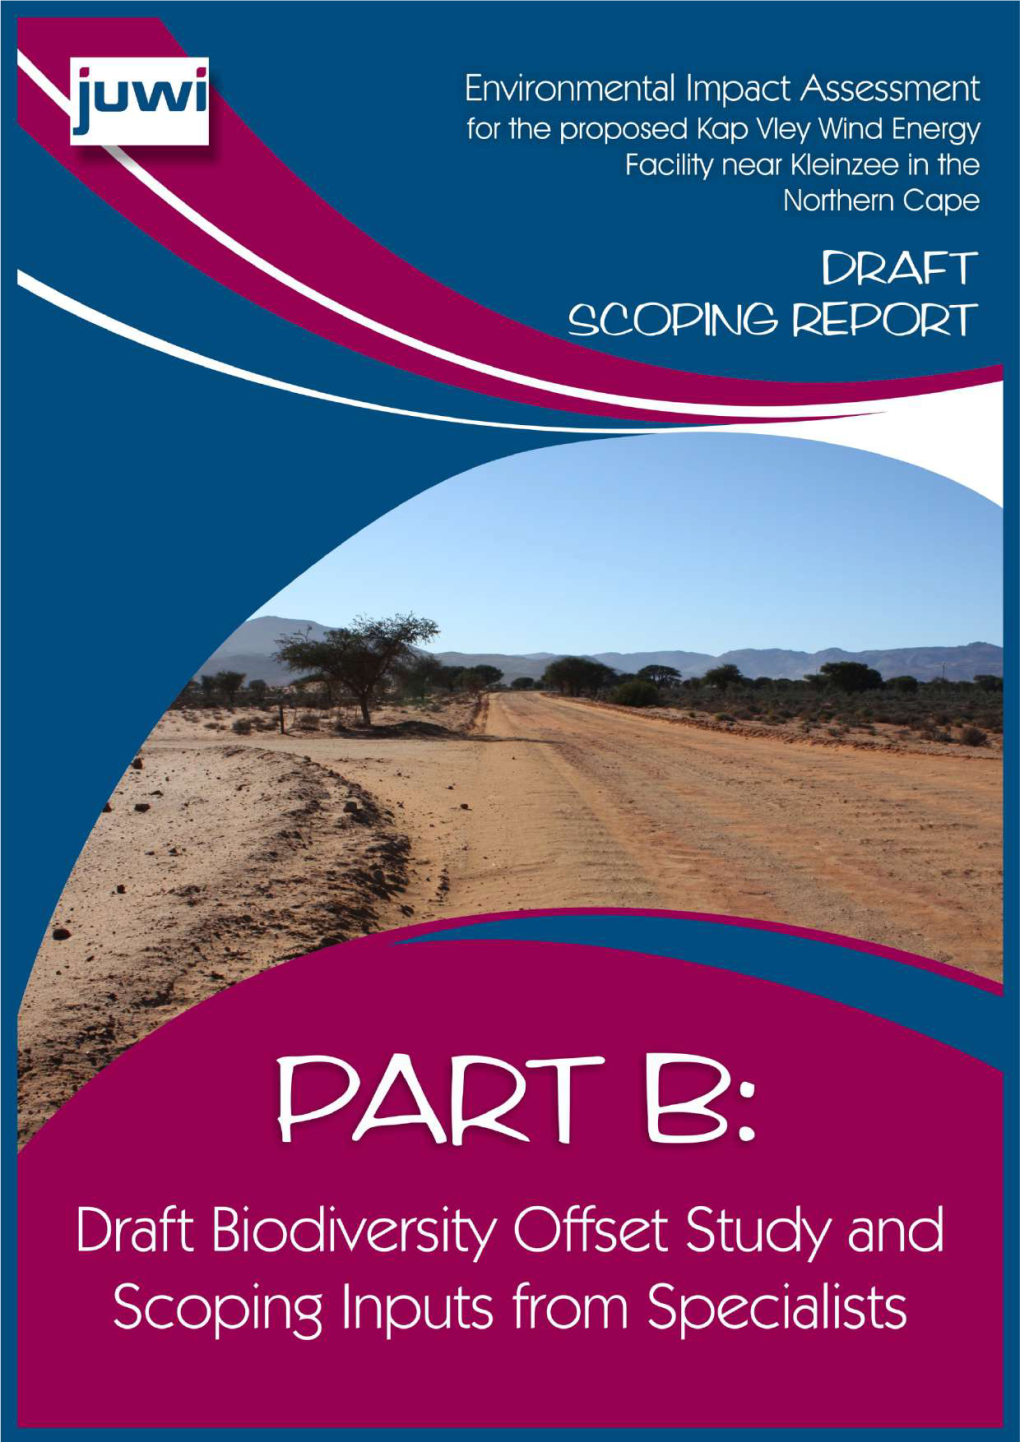 Bat Impact Assessment for the Kap Vley Wind Energy Facility, Northern Cape Province